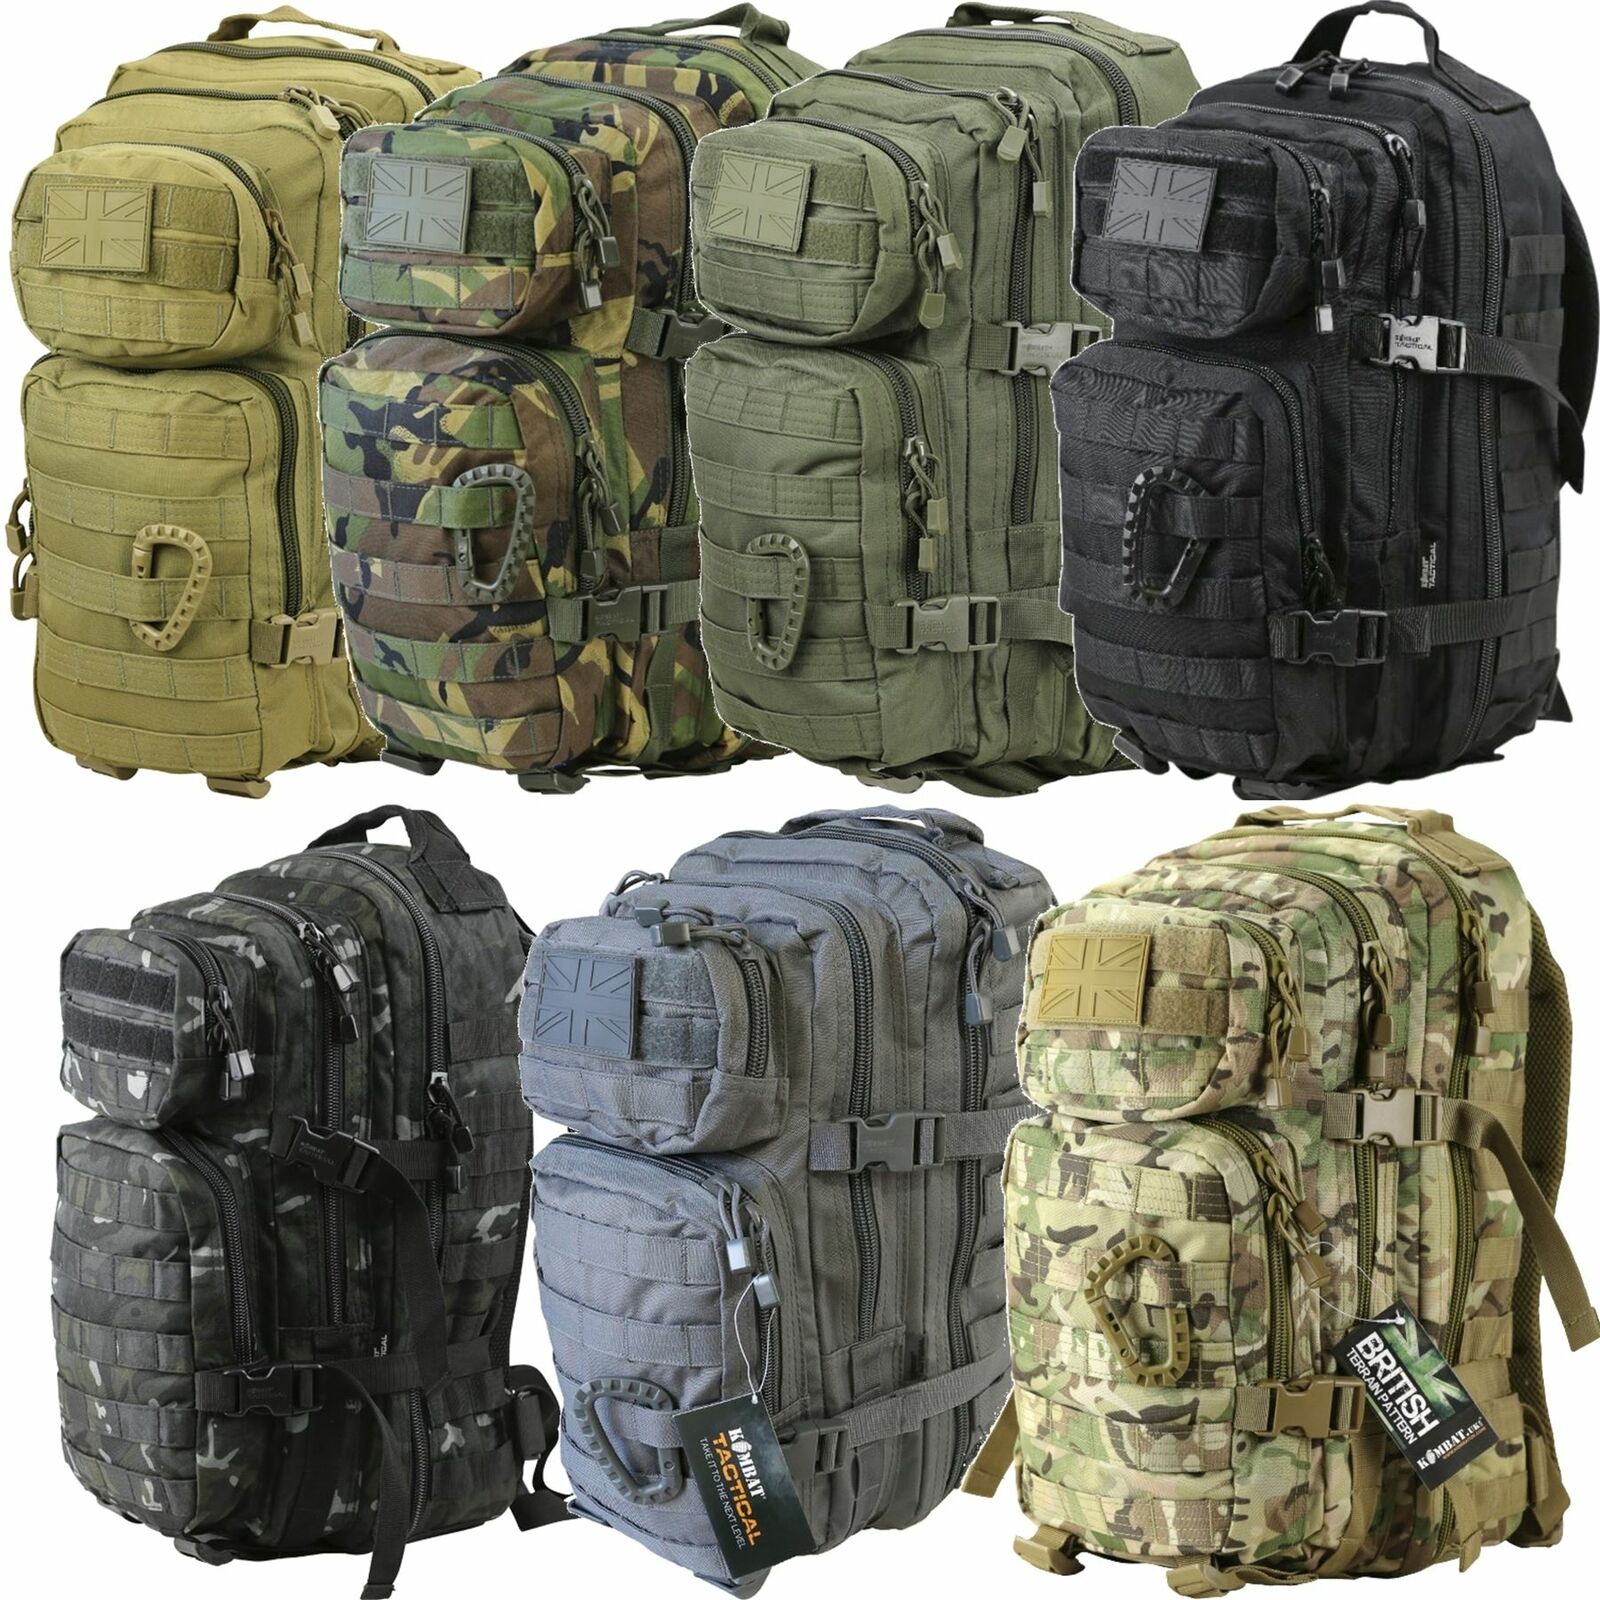 Kombat UK Small Tactical Army Assault Military Molle Bag Back Pack